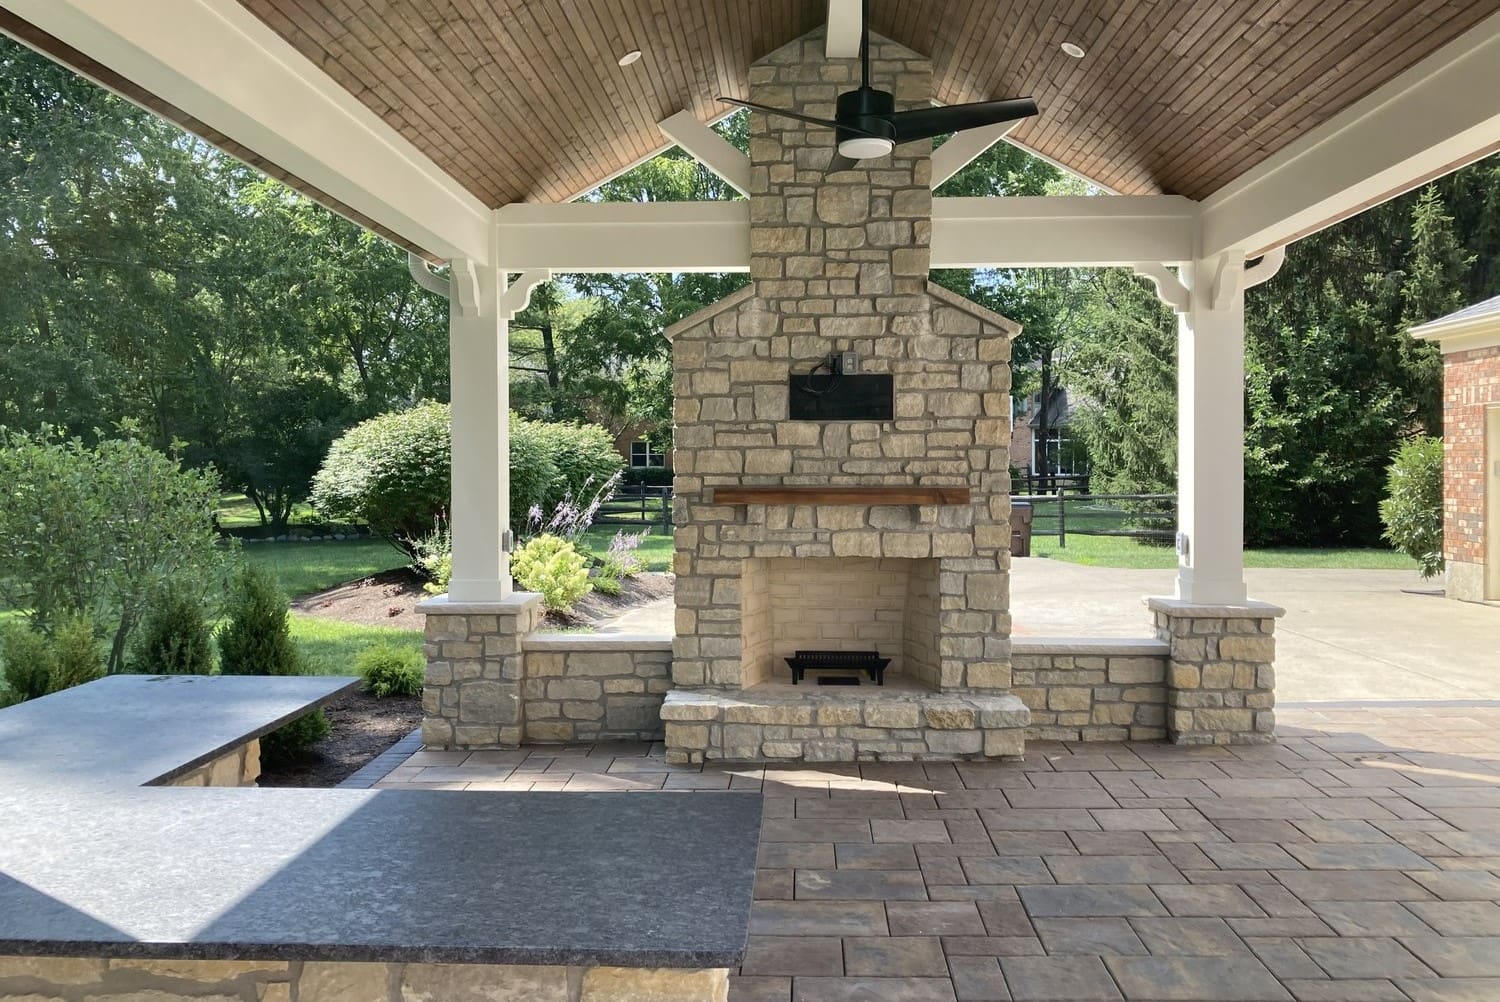 How To Build An Outdoor Fireplace On A Patio